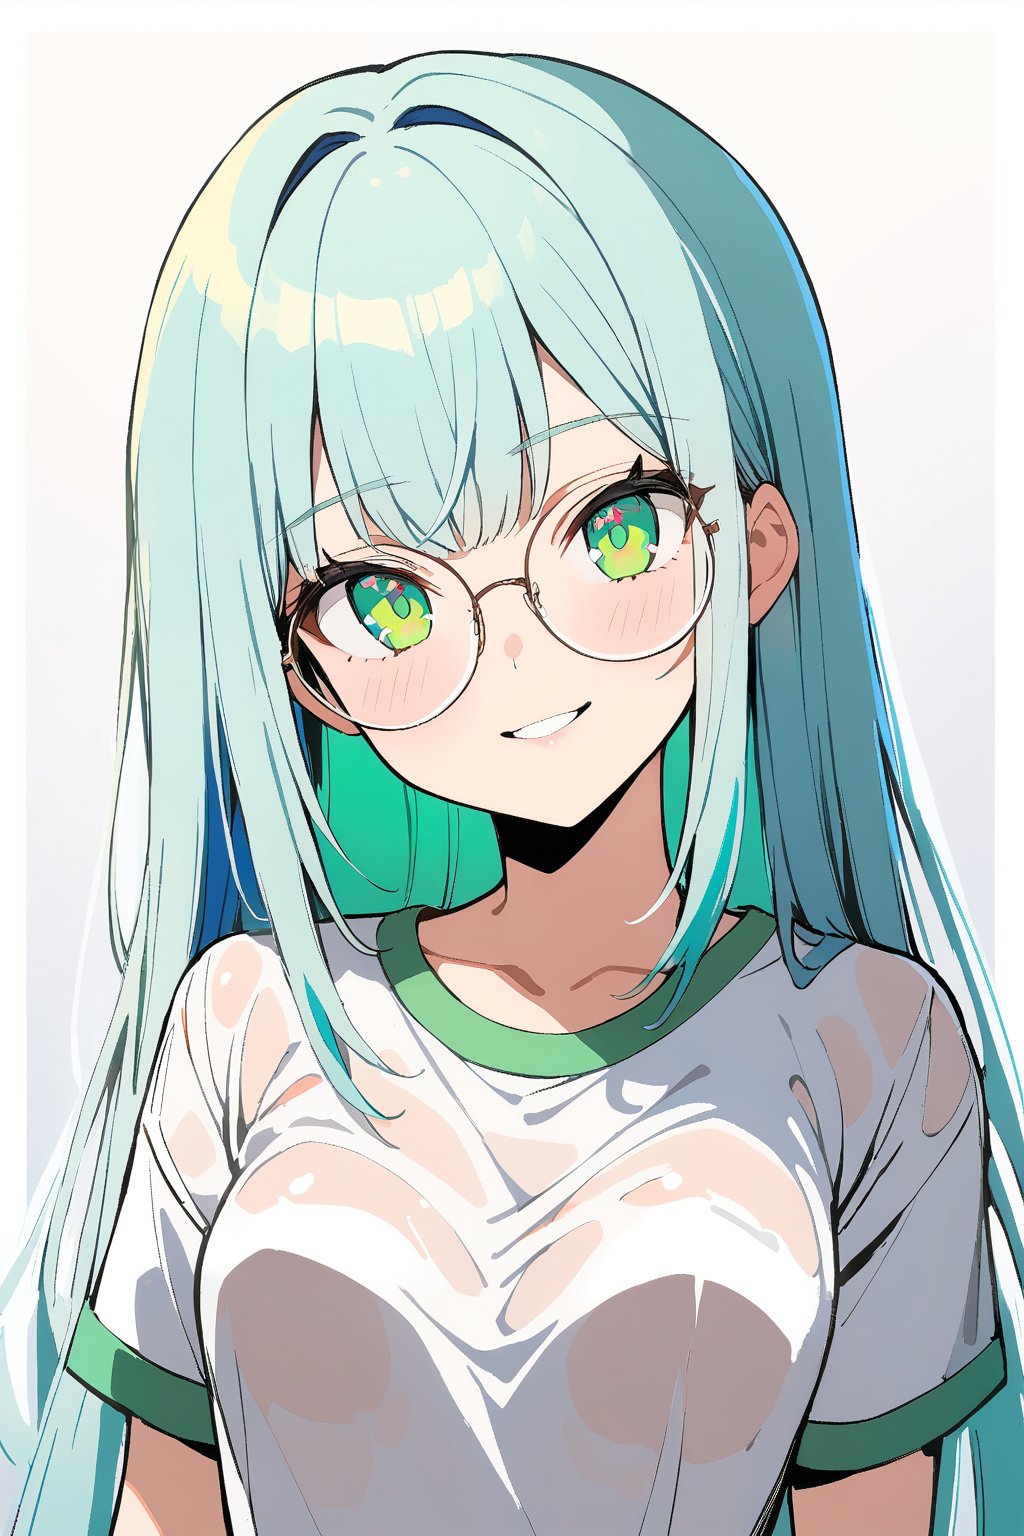 1 girl, Luna, white long hair, (round glasses), ( green eyes: 1.5), loose hair, messy hair, shaved side of the head, head swept to one side. She wears wet uniform,

Masterpiece, best quality, 4k, absurdres. Shiny eyes, smirk, 2D, flat tones, flat shading, white outline, cel shading. From below.